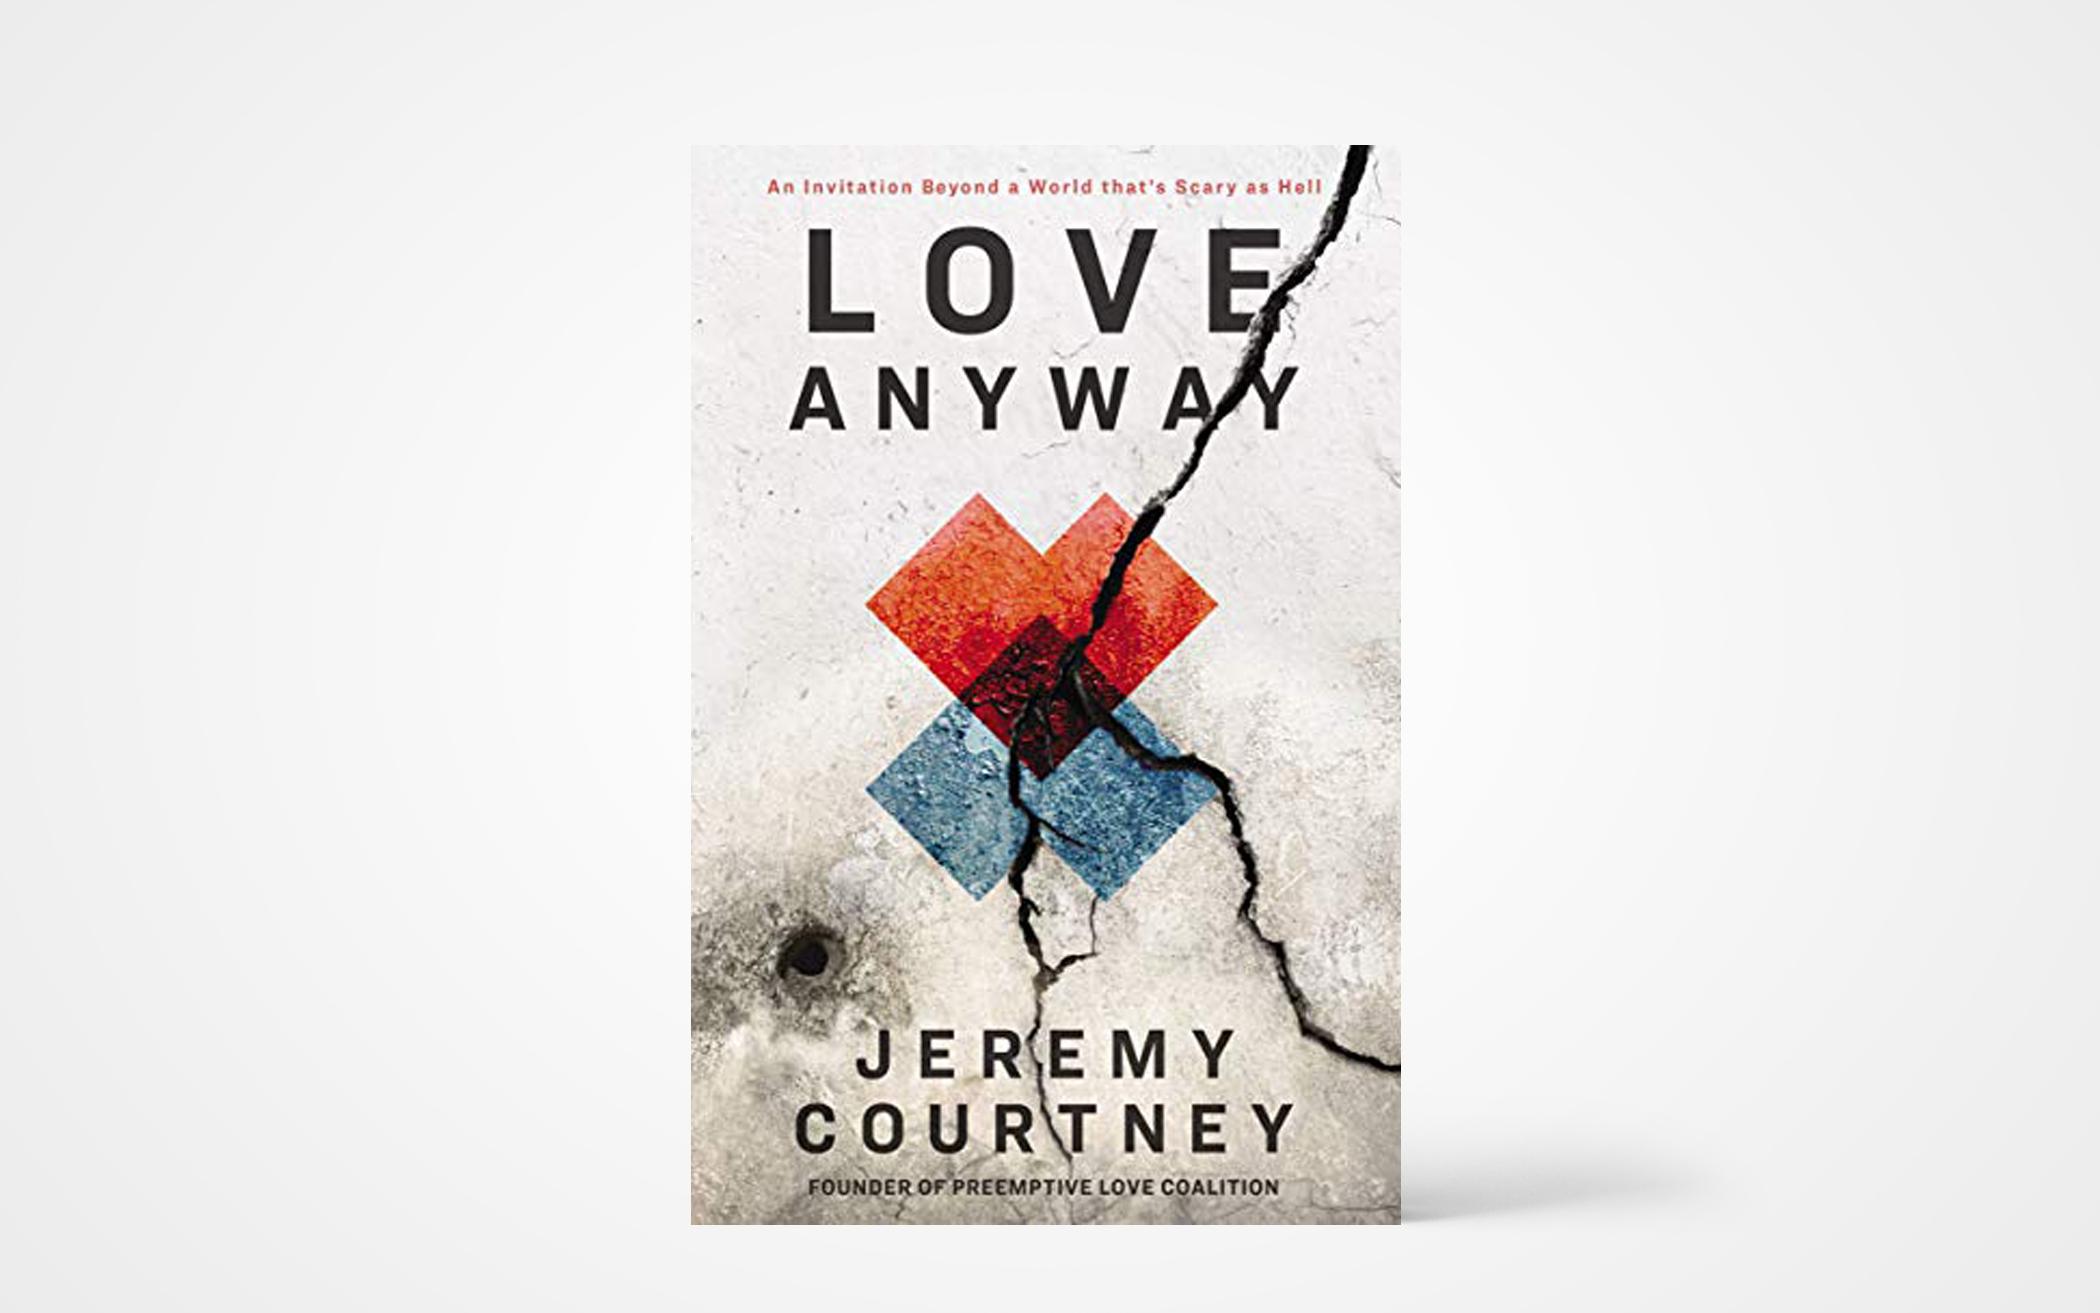 Love Anyway: An Invitation Beyond a World That’s Scary As Hell